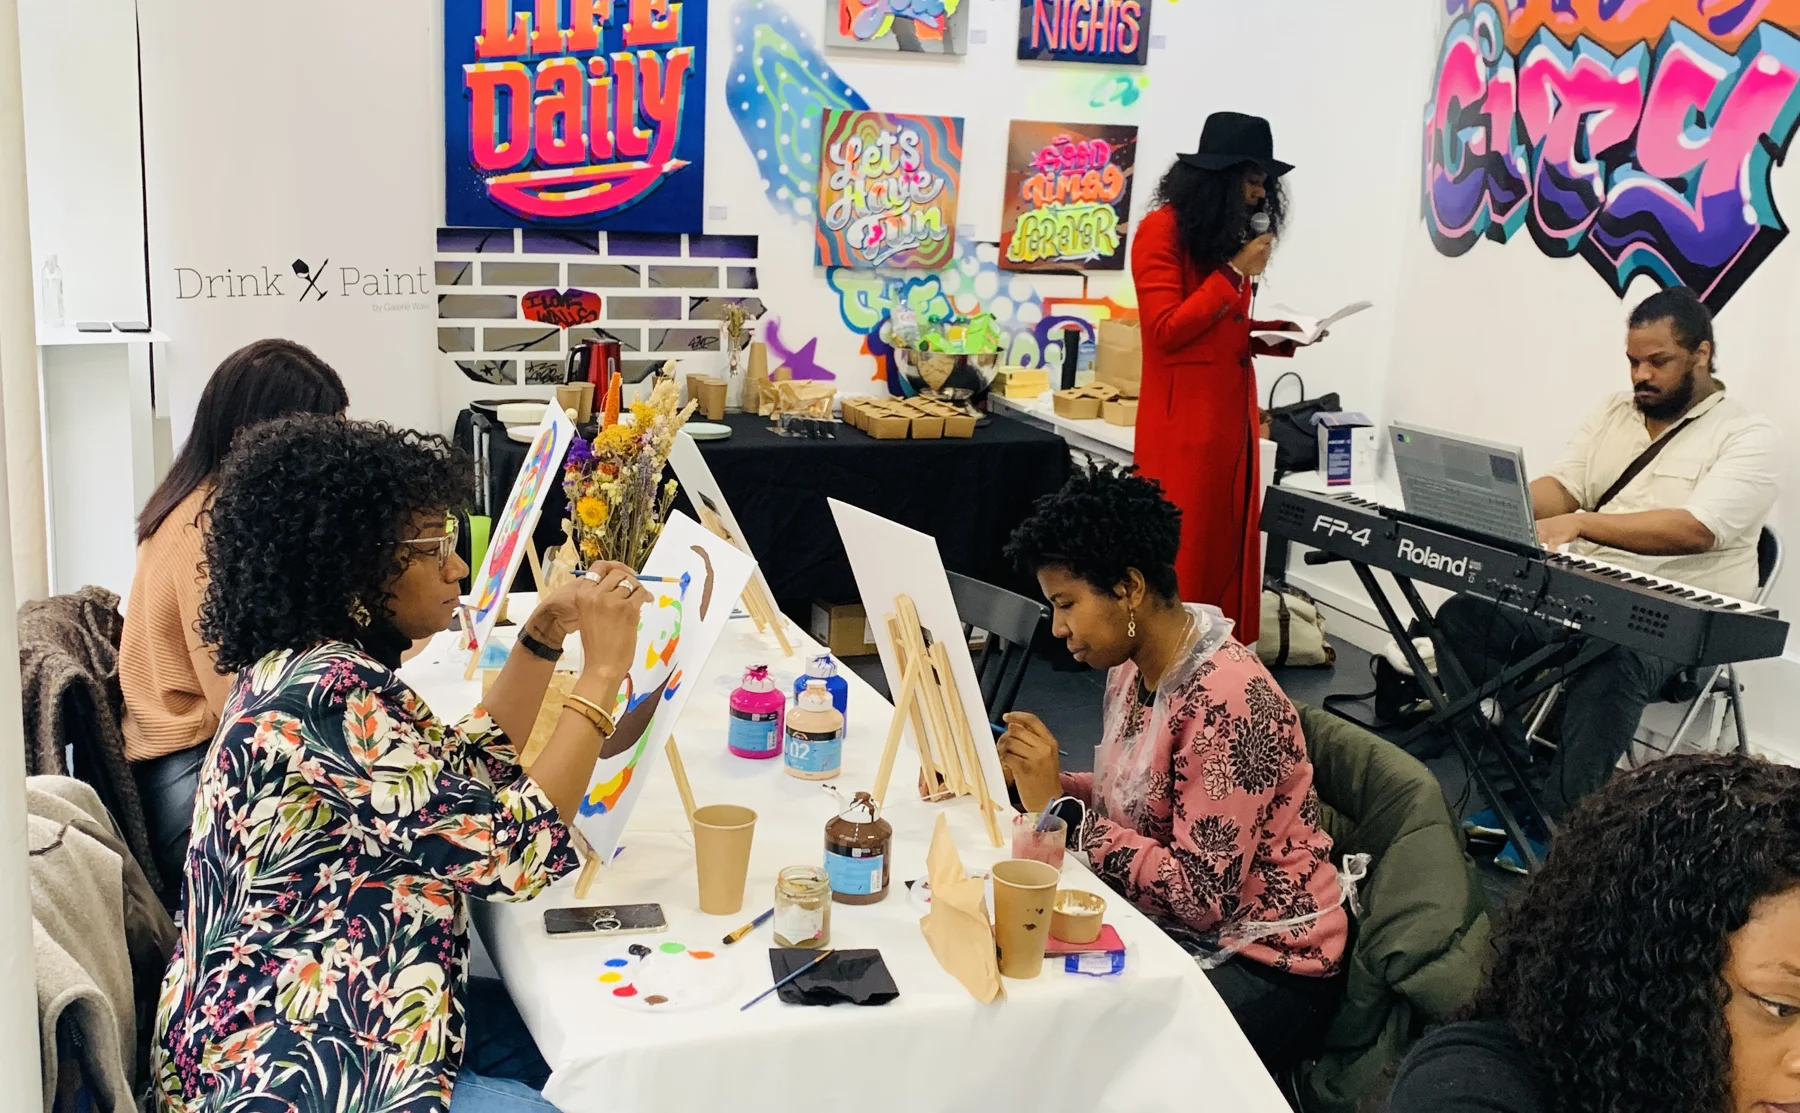 Drink & Paint in an art gallery (7pm) - 1464547